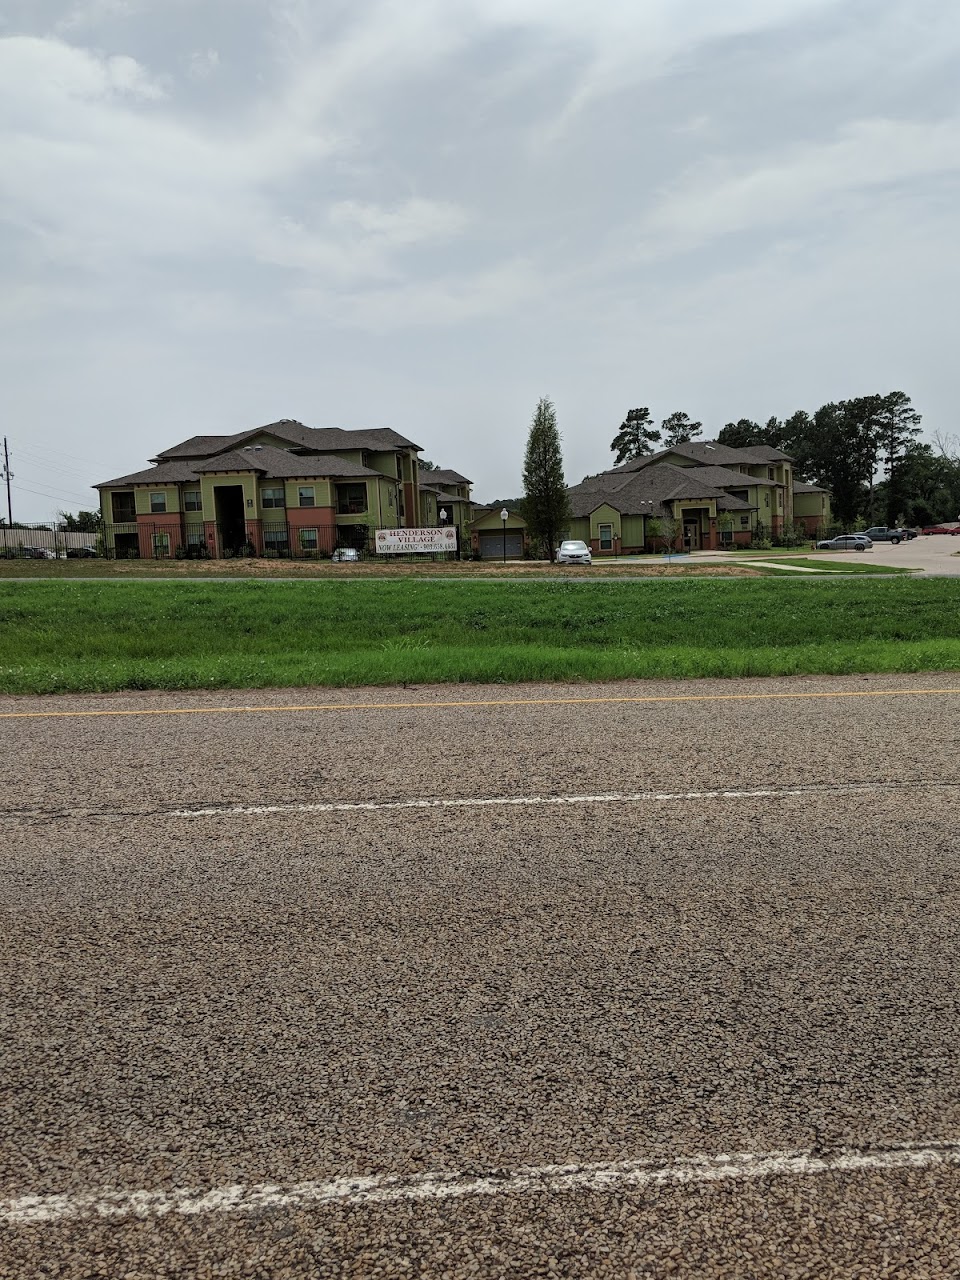 Photo of HENDERSON VILLAGE. Affordable housing located at 1400 BLOCK OF HWY 259 HENDERSON, TX 75654